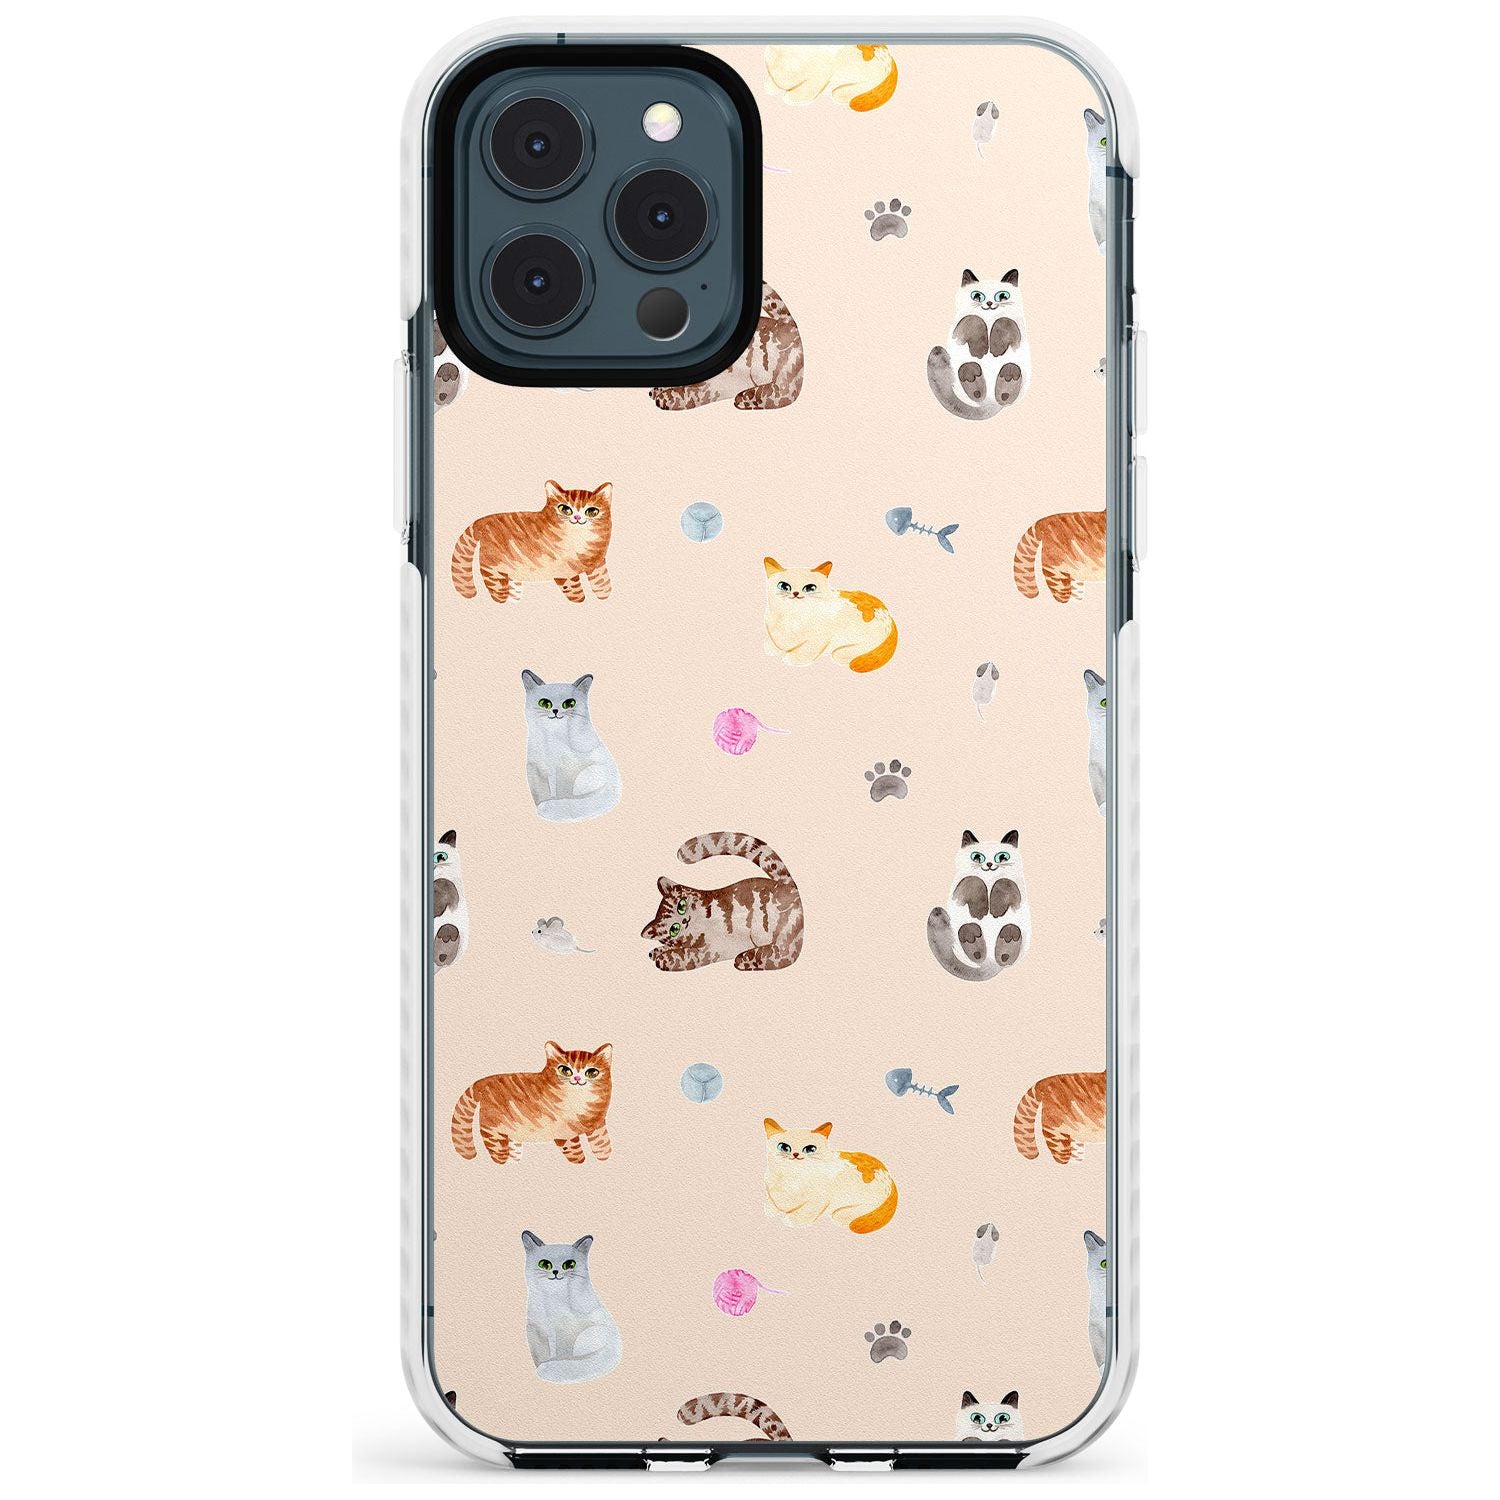 Cats with Toys Slim TPU Phone Case for iPhone 11 Pro Max